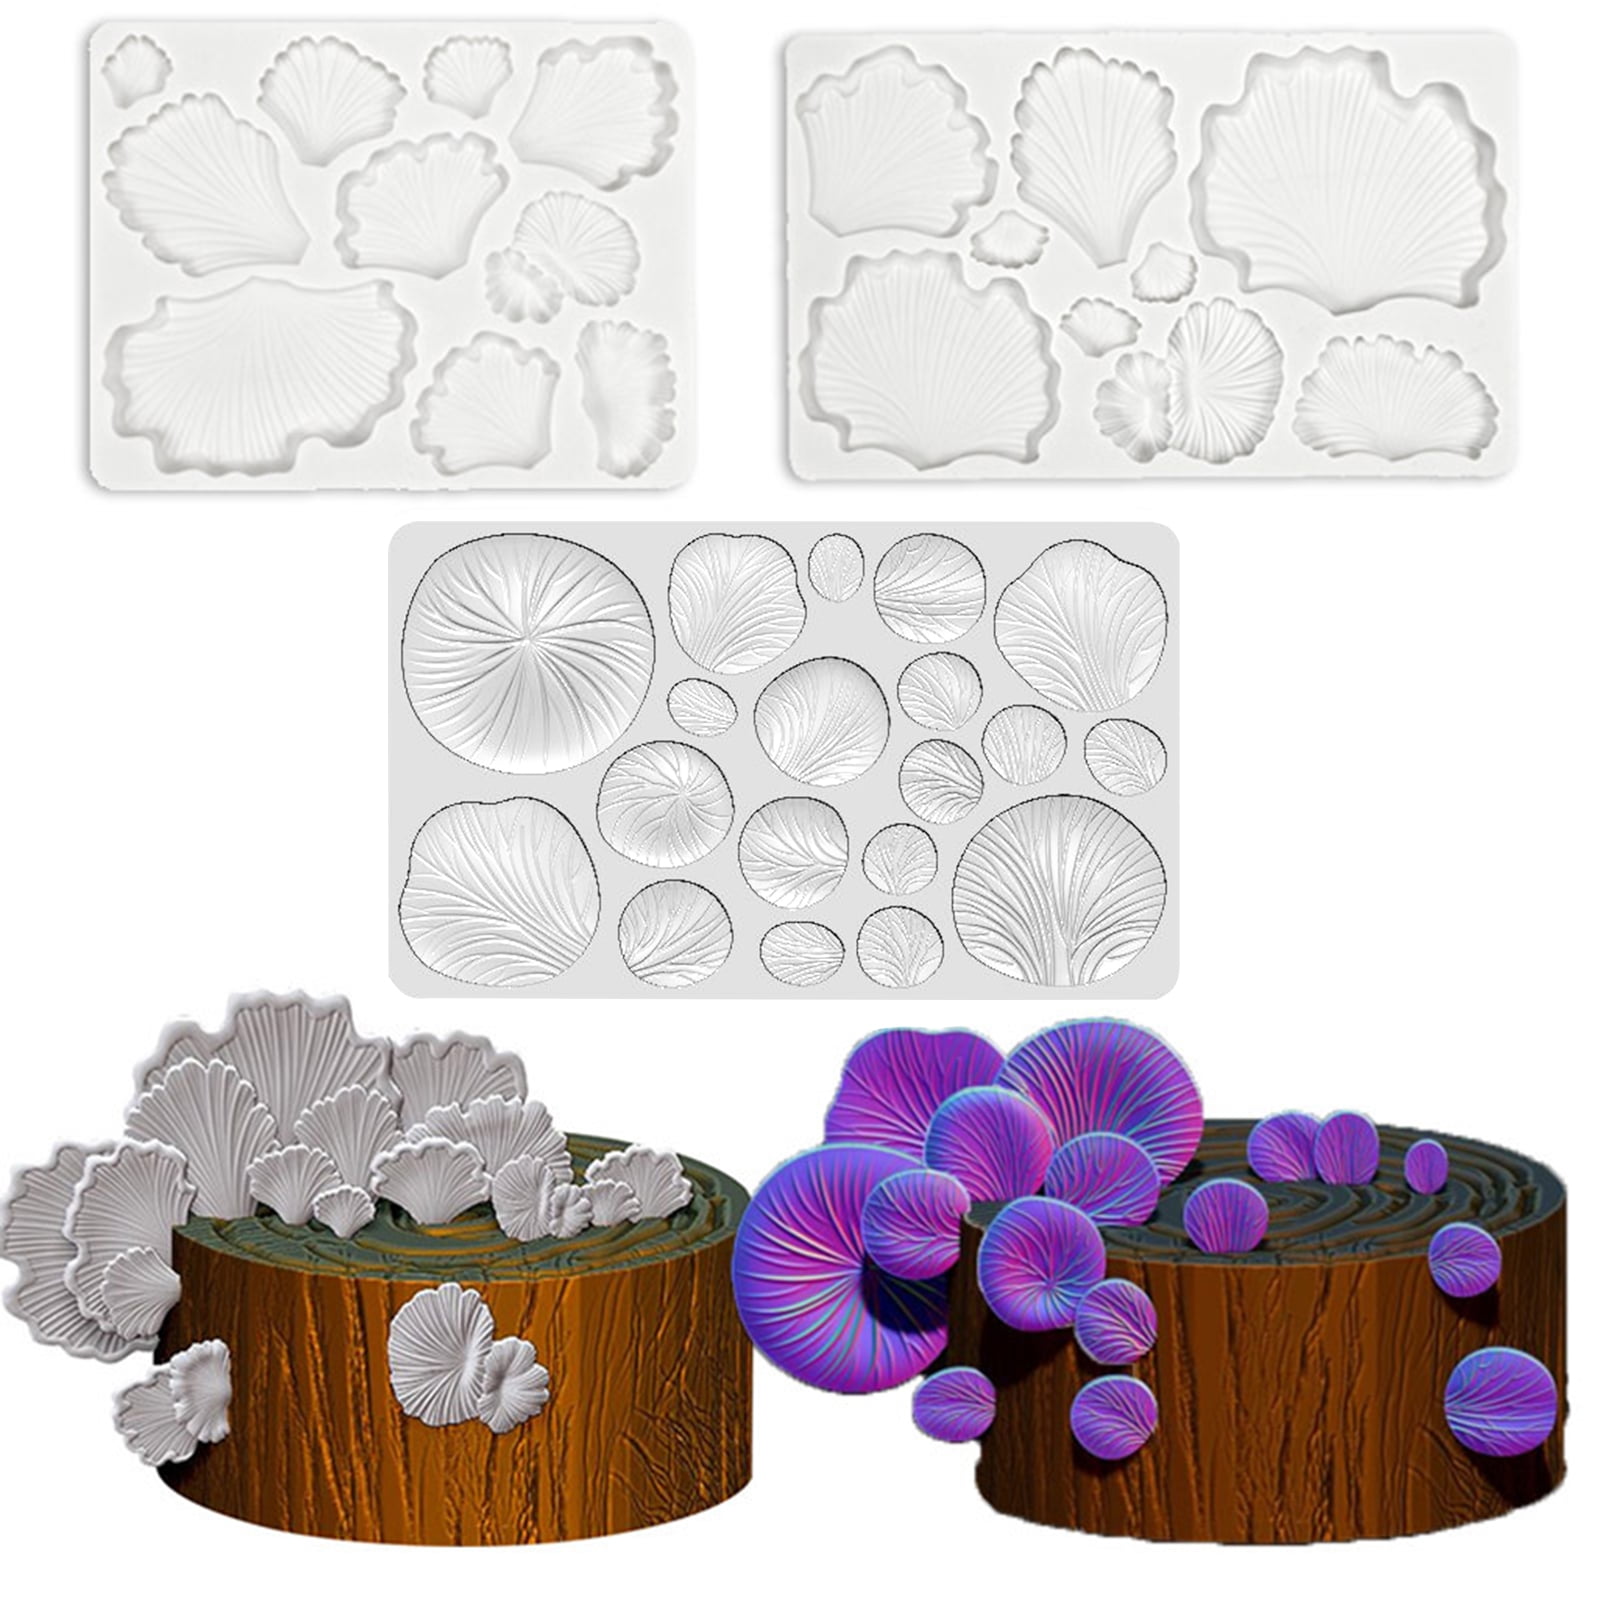 YX STORE Fondant Mold Super Soft Hear-Resistant Silicone Mushroom Modeling  Flexible Pastry Mold Cake Decoration for Home 